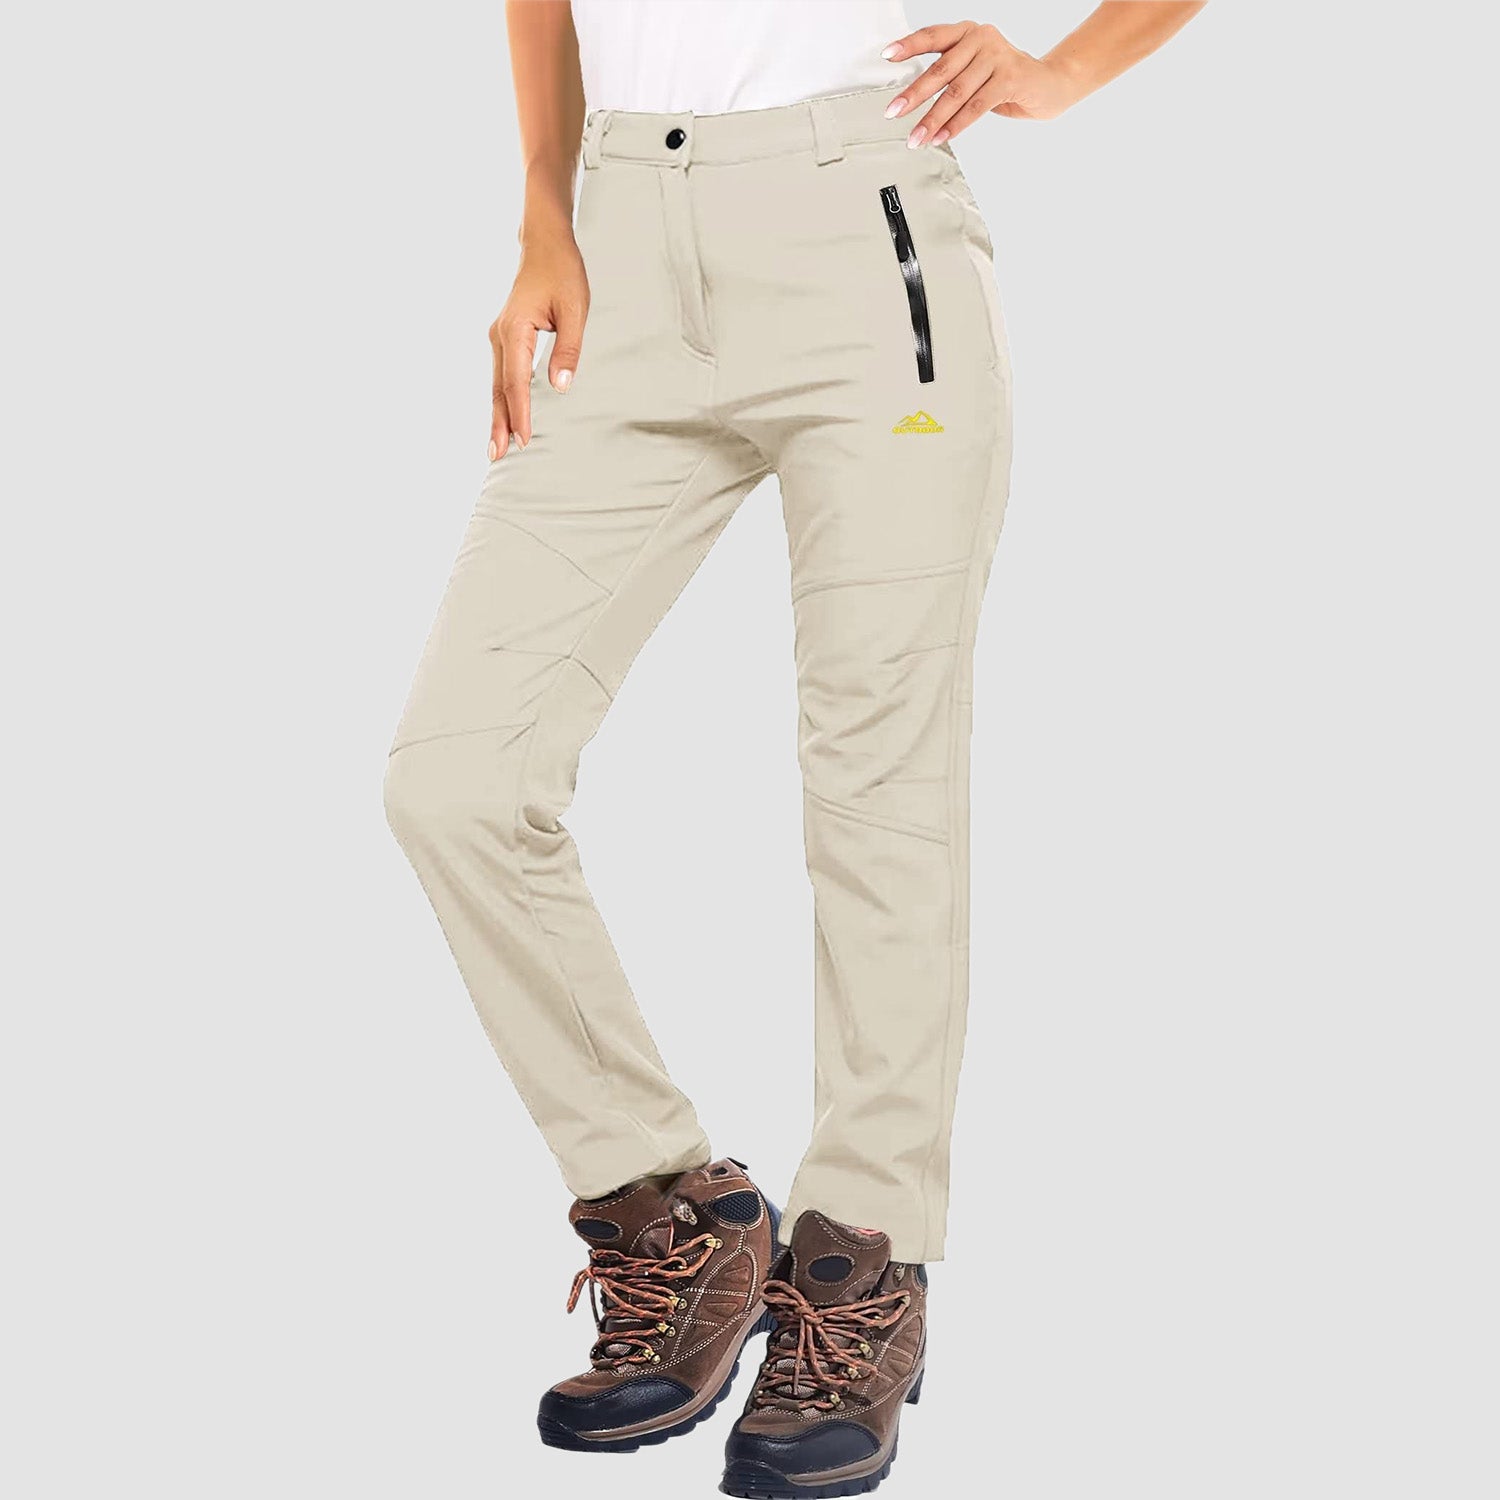 Mier Women's Quick Dry Cargo Pants Tactical Hiking Pants, Maroon / 12